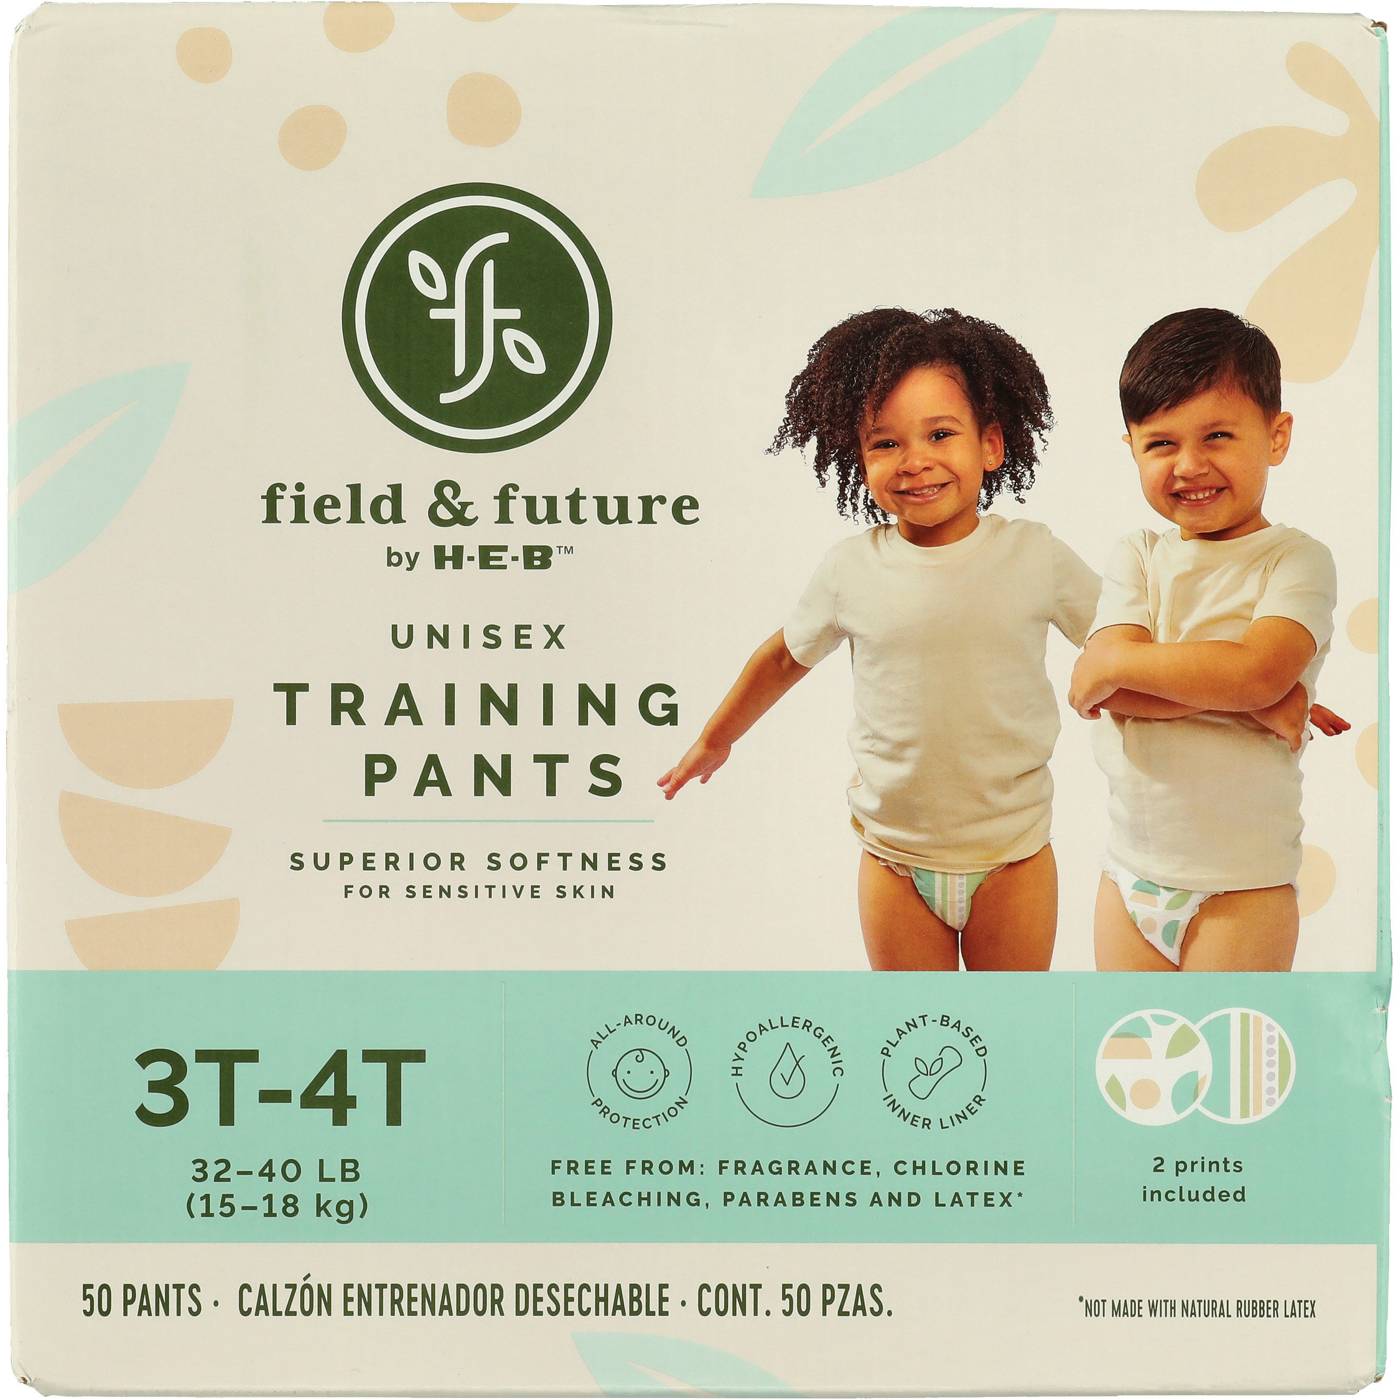 Pampers Easy Ups Girls Training Underwear - 2T - 3T - Shop Training Pants  at H-E-B